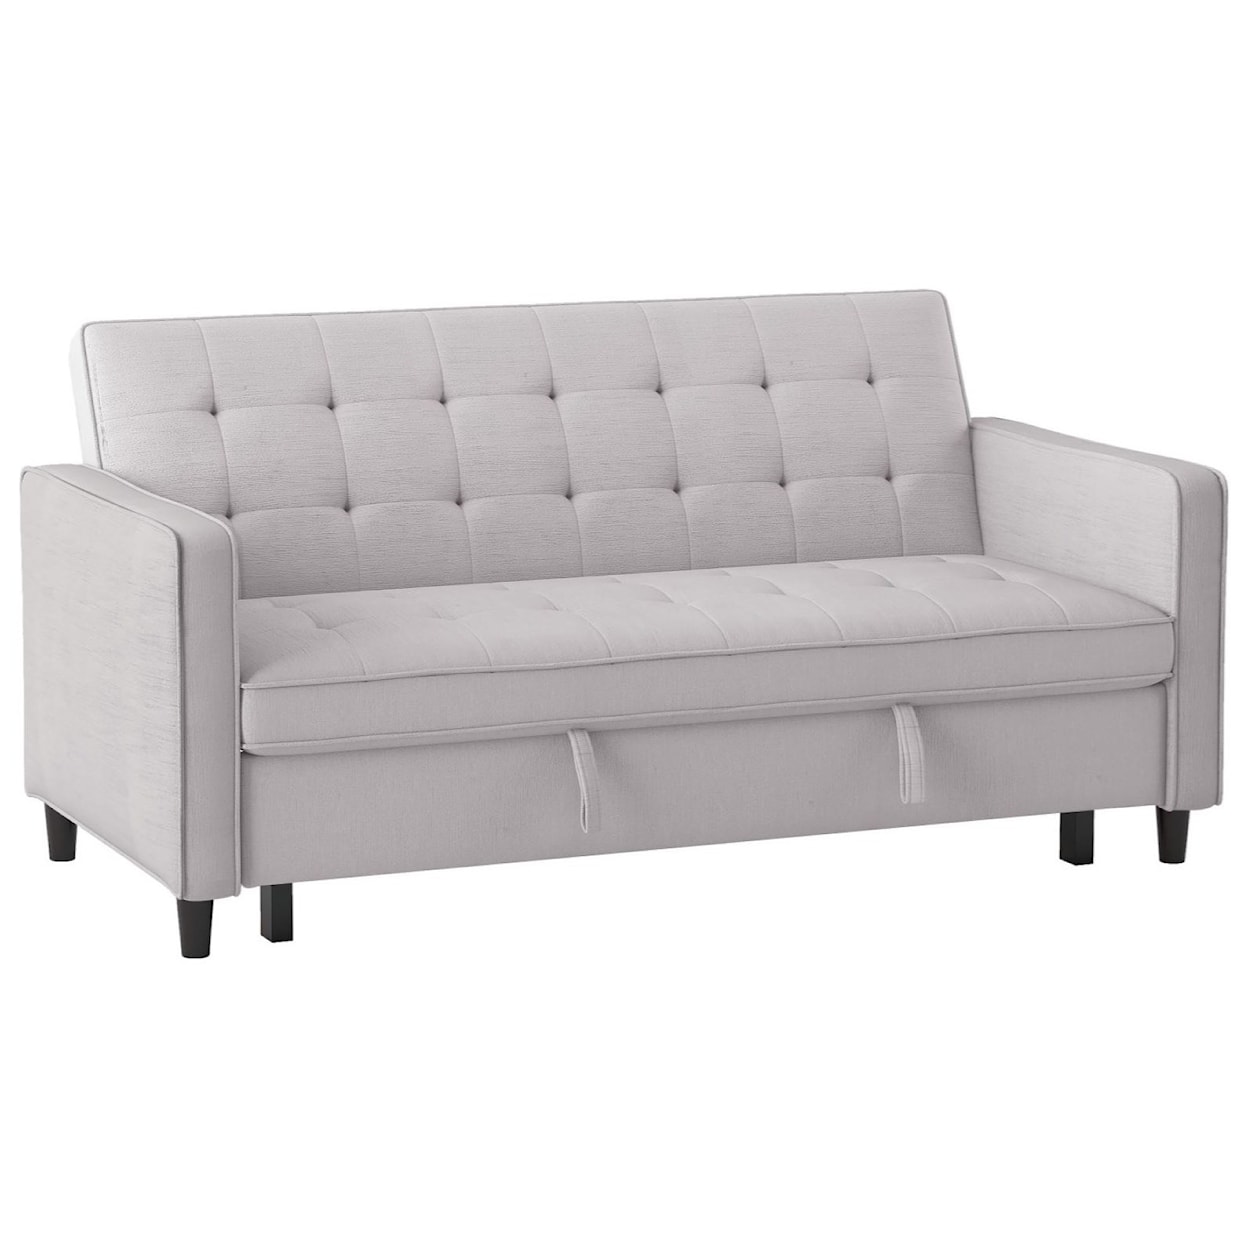 Homelegance  Convertible Studio Sofa with Pull-out Bed